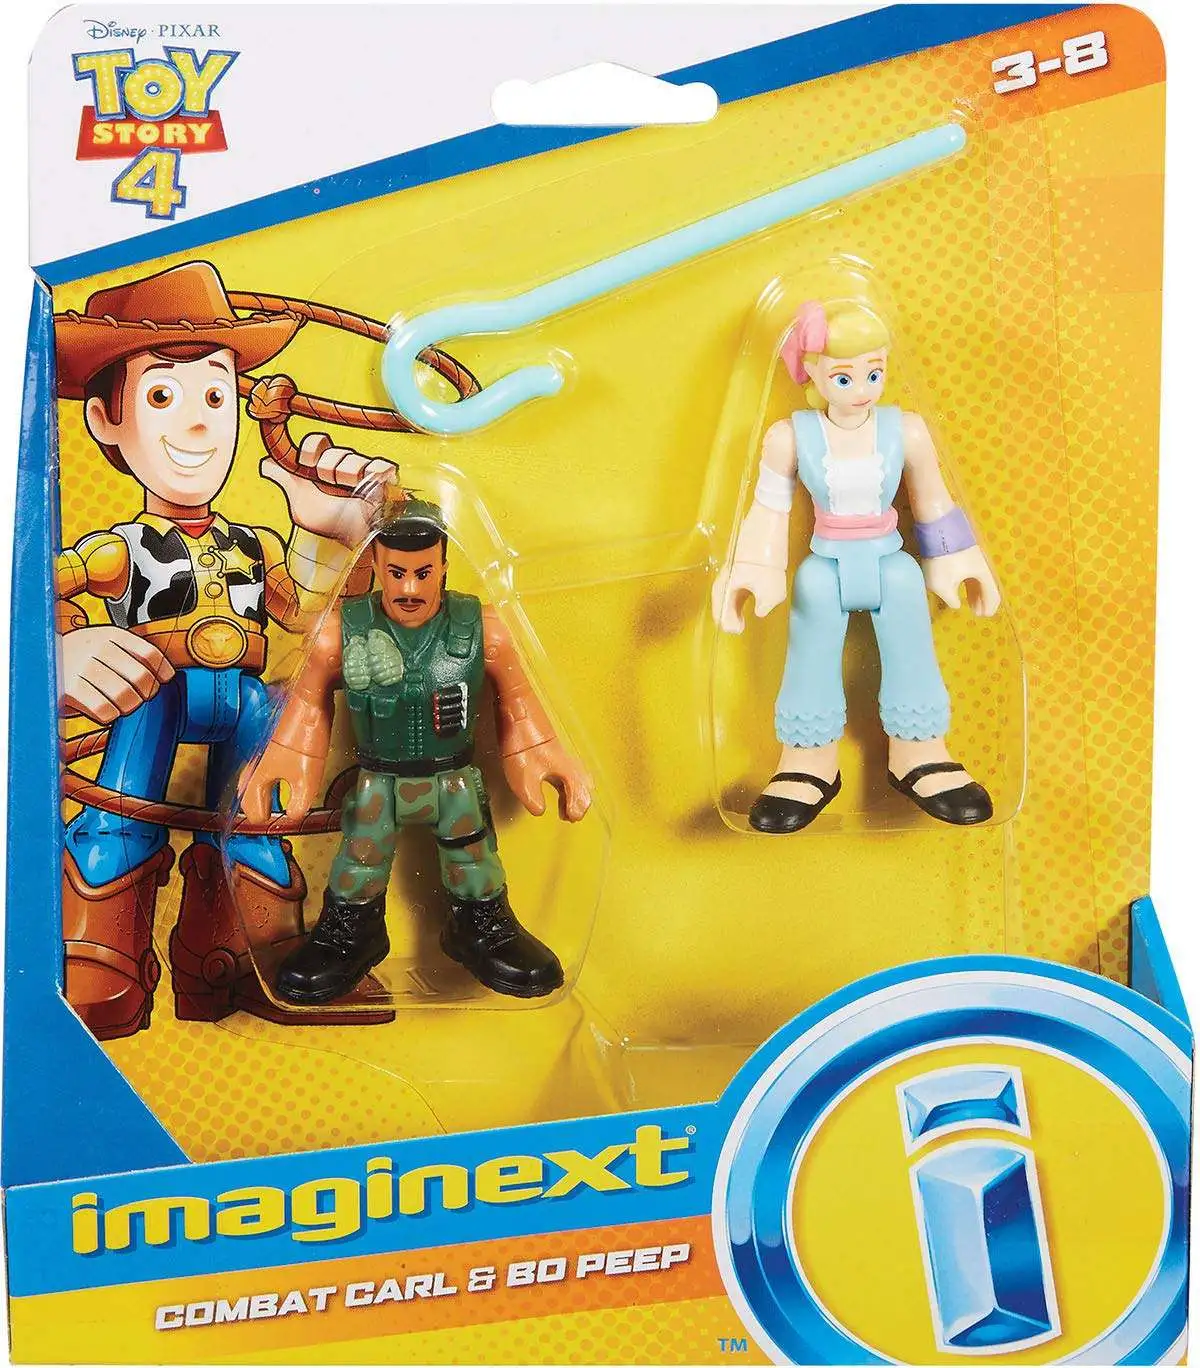 Details about   Imaginext Toy Story 4 Combat Carl Bo Peep Fisher Price NEW 